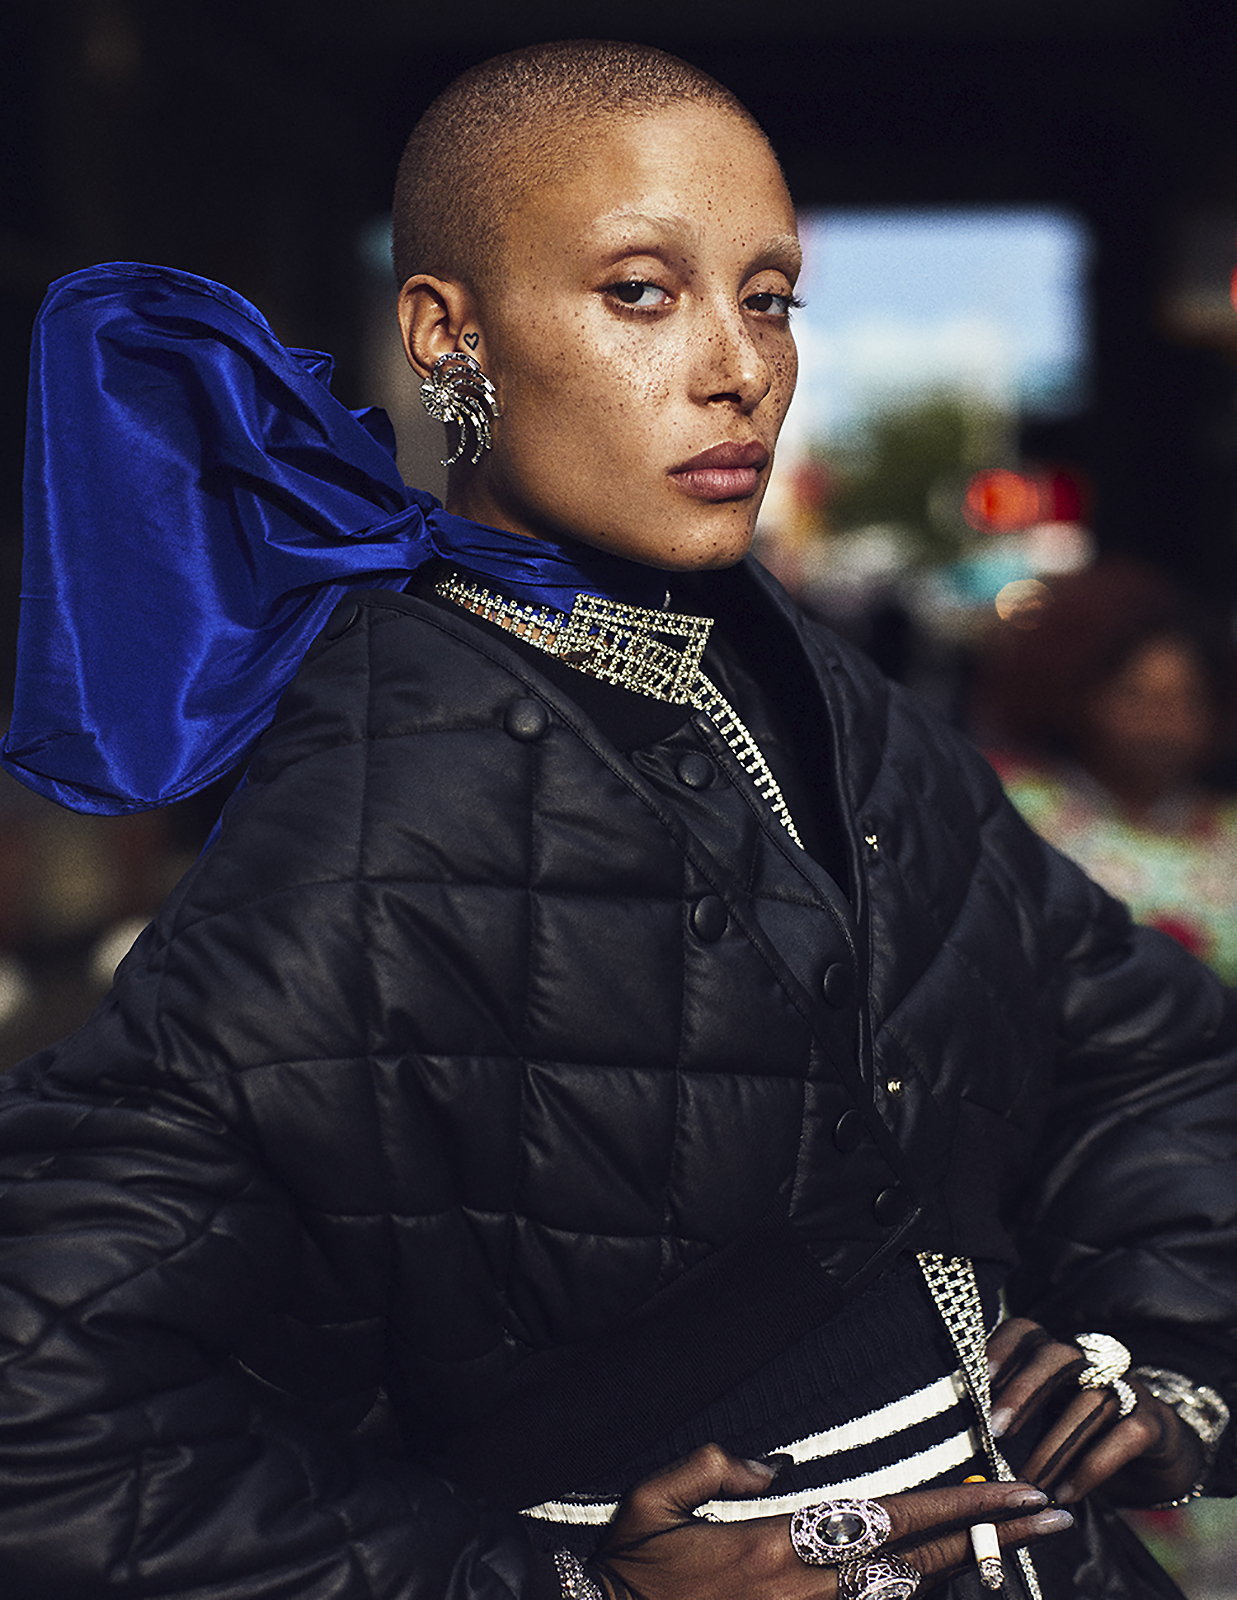 Adwoa Aboah Goes High Drama In Mikael Jansson Images For Interview Magazine...